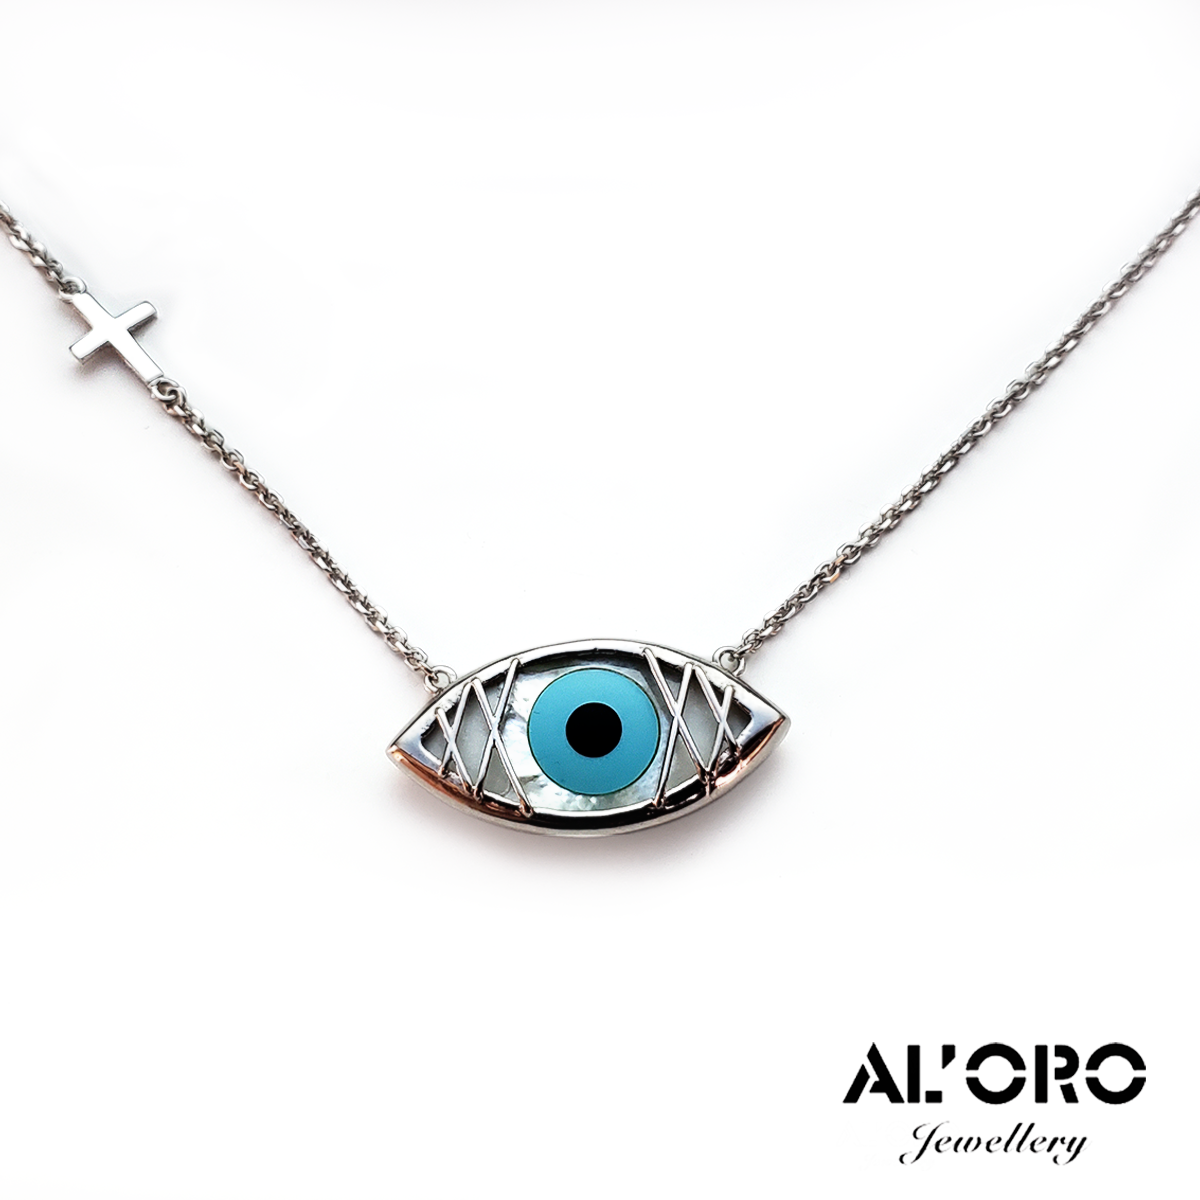 AL'ORO 14K Gold Big Evil Eye And Cross With Iridescent White Seashell Necklace Line Design